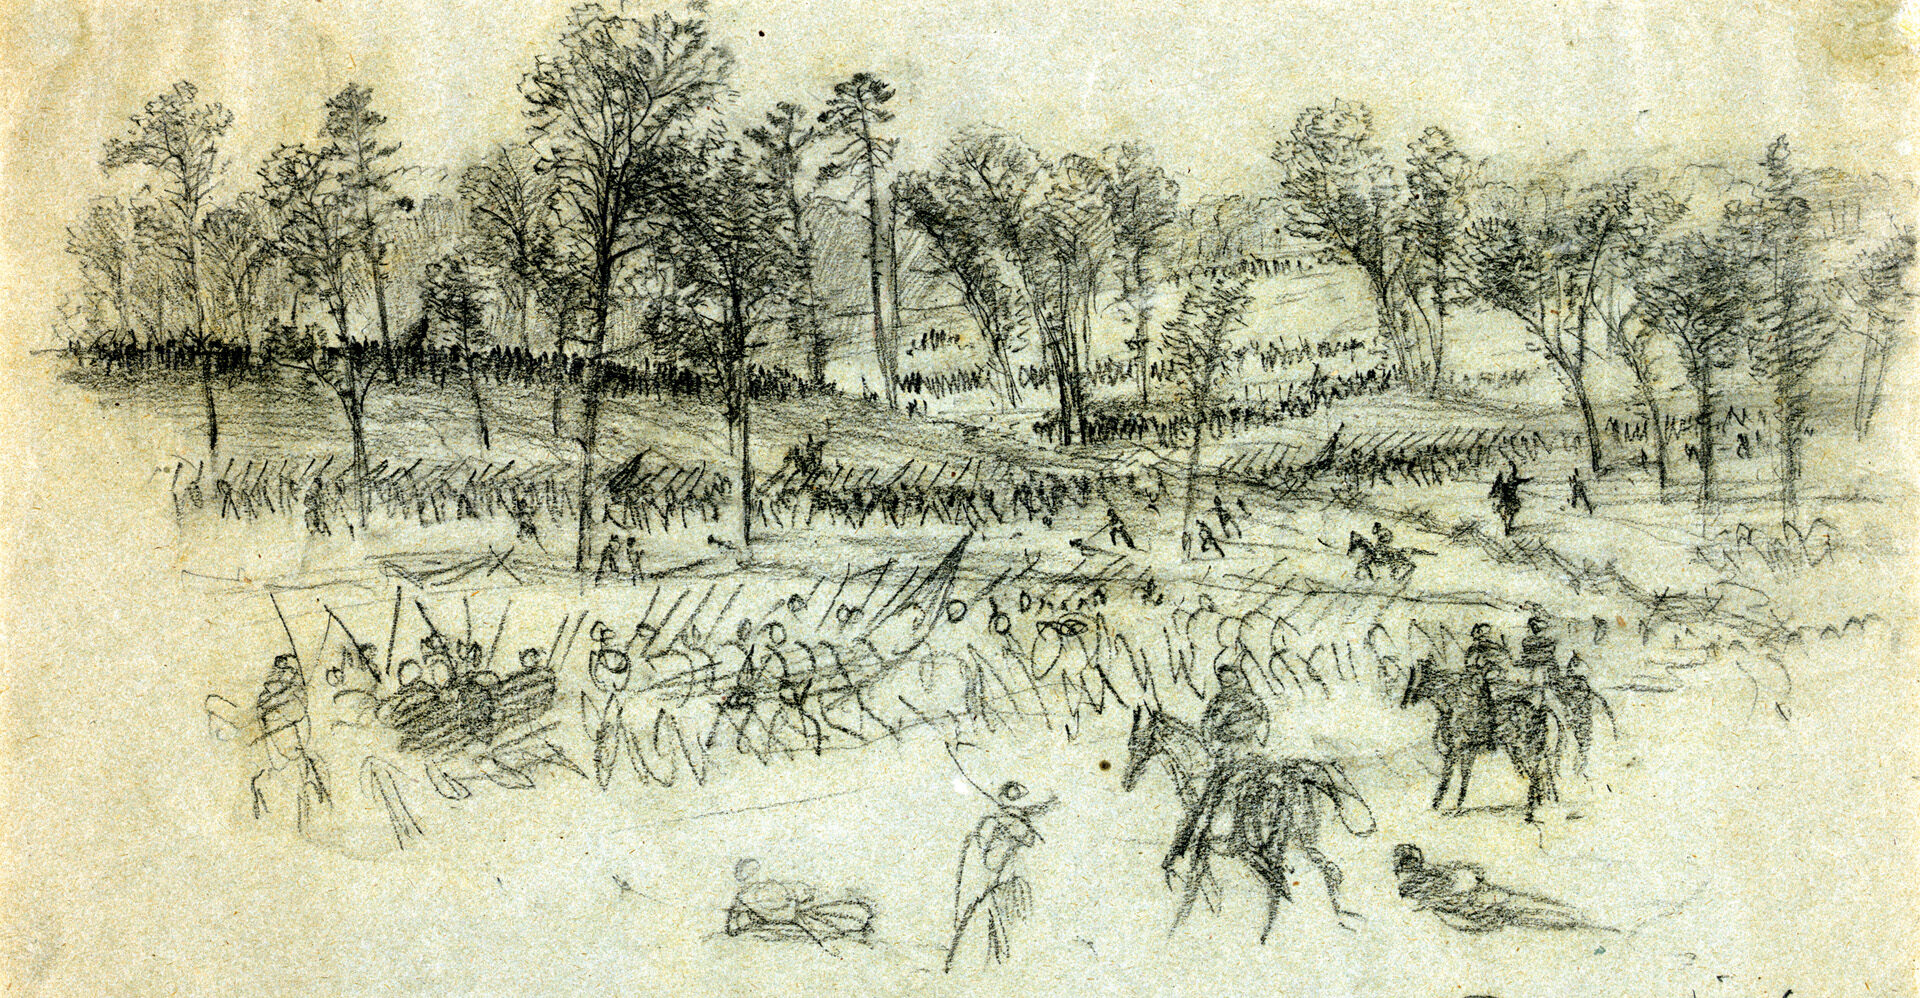 Brig. Gen. James B. Steedman’s division of the Union Reserve Corps arrives to reinforce Thomas. Its 4,000 fresh troops helped Thomas hold Snodgrass Hill in the face of determined Confederate assaults.